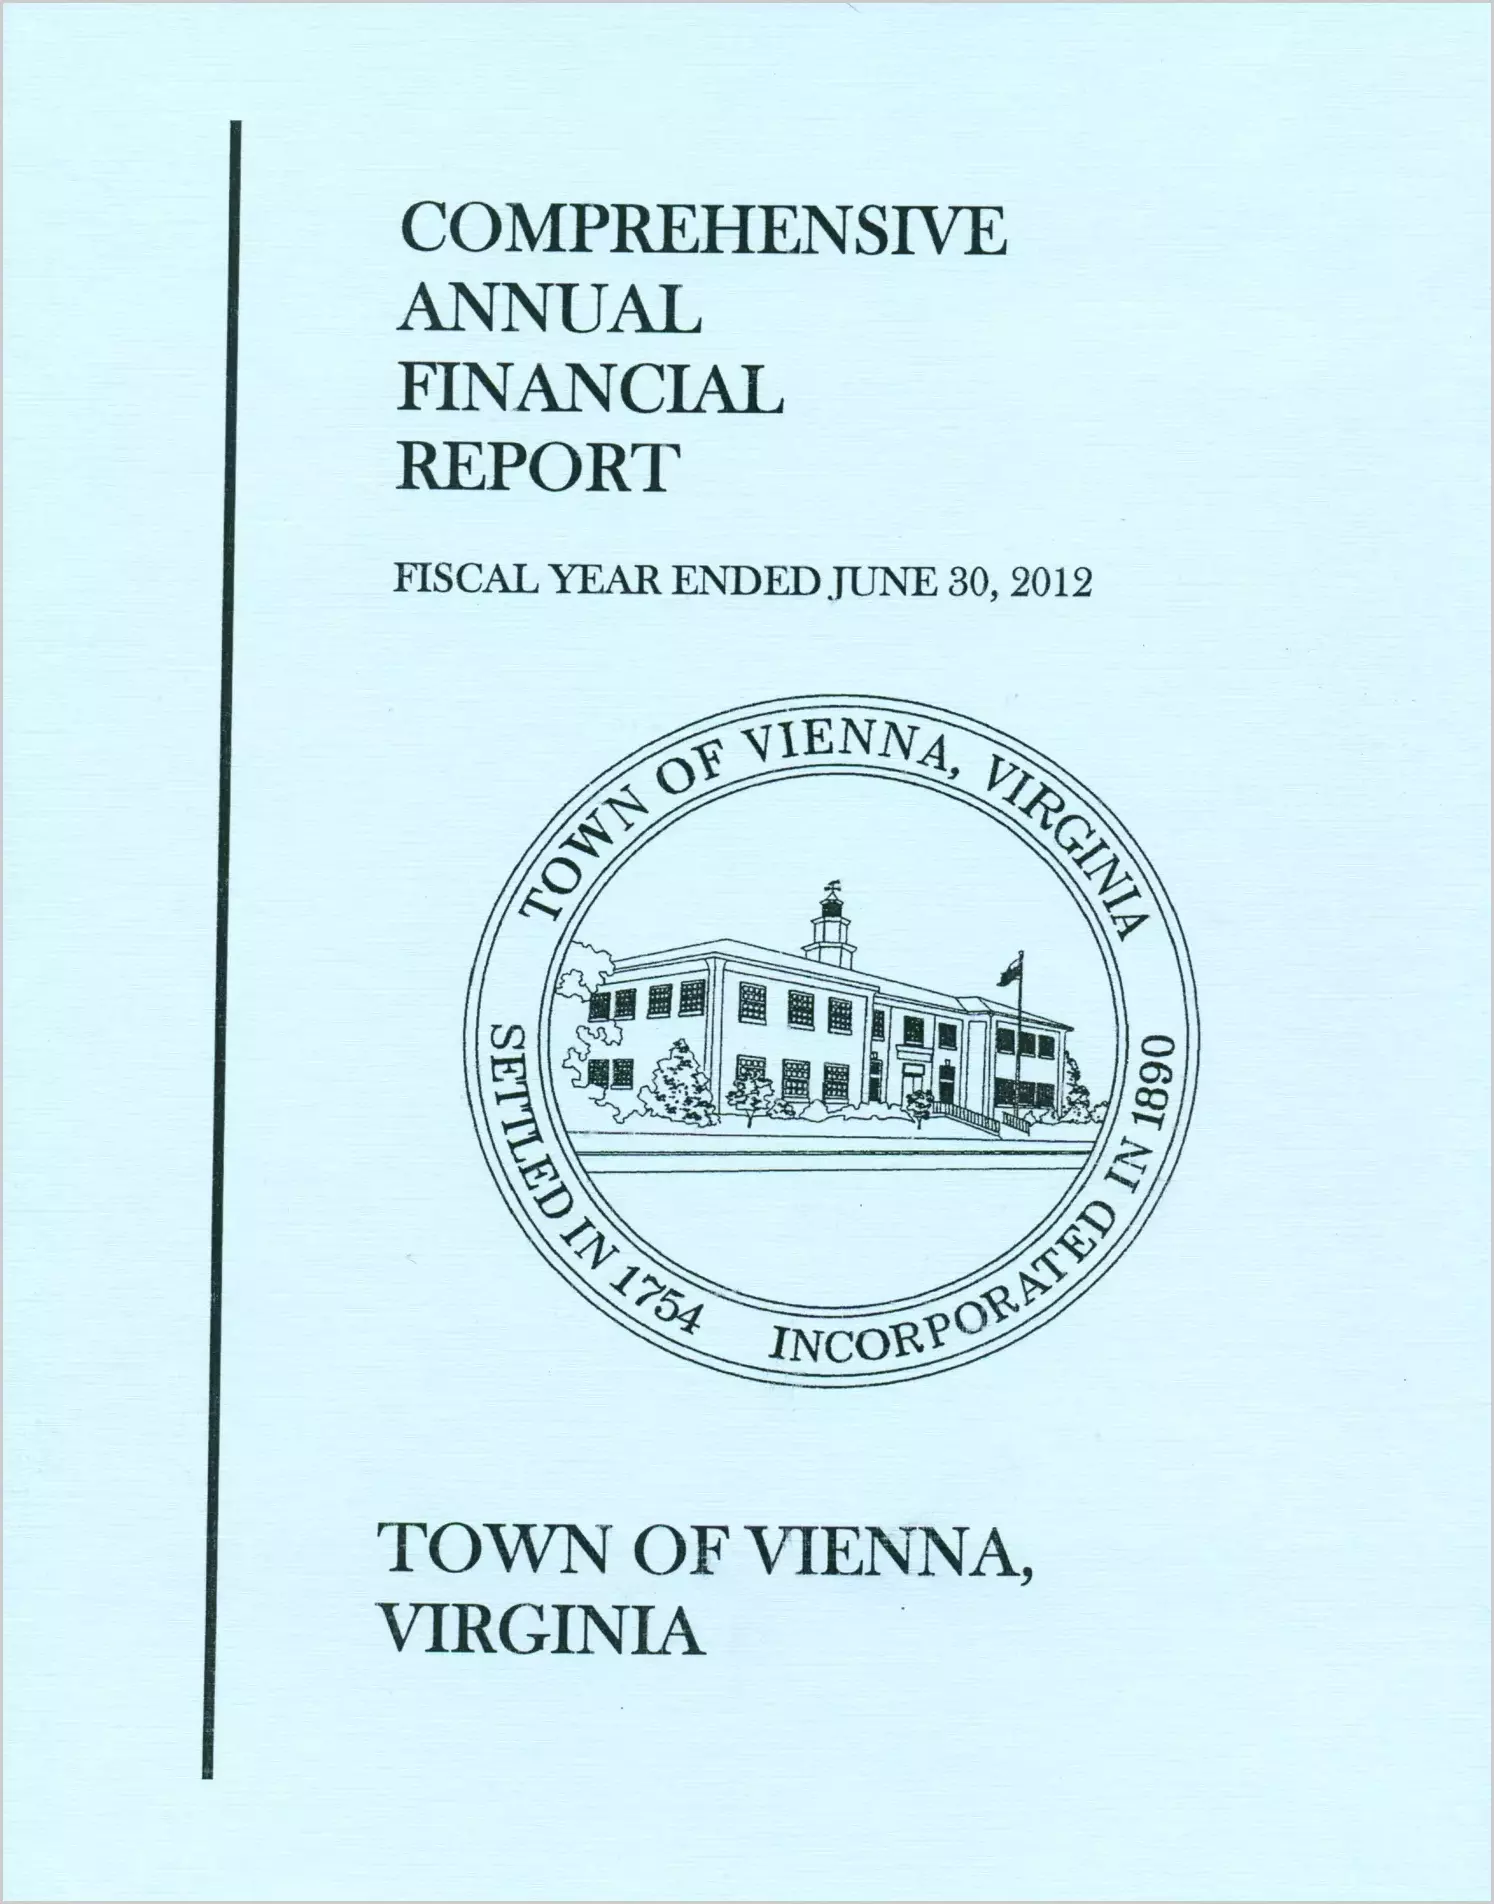 2012 Annual Financial Report for Town of Vienna